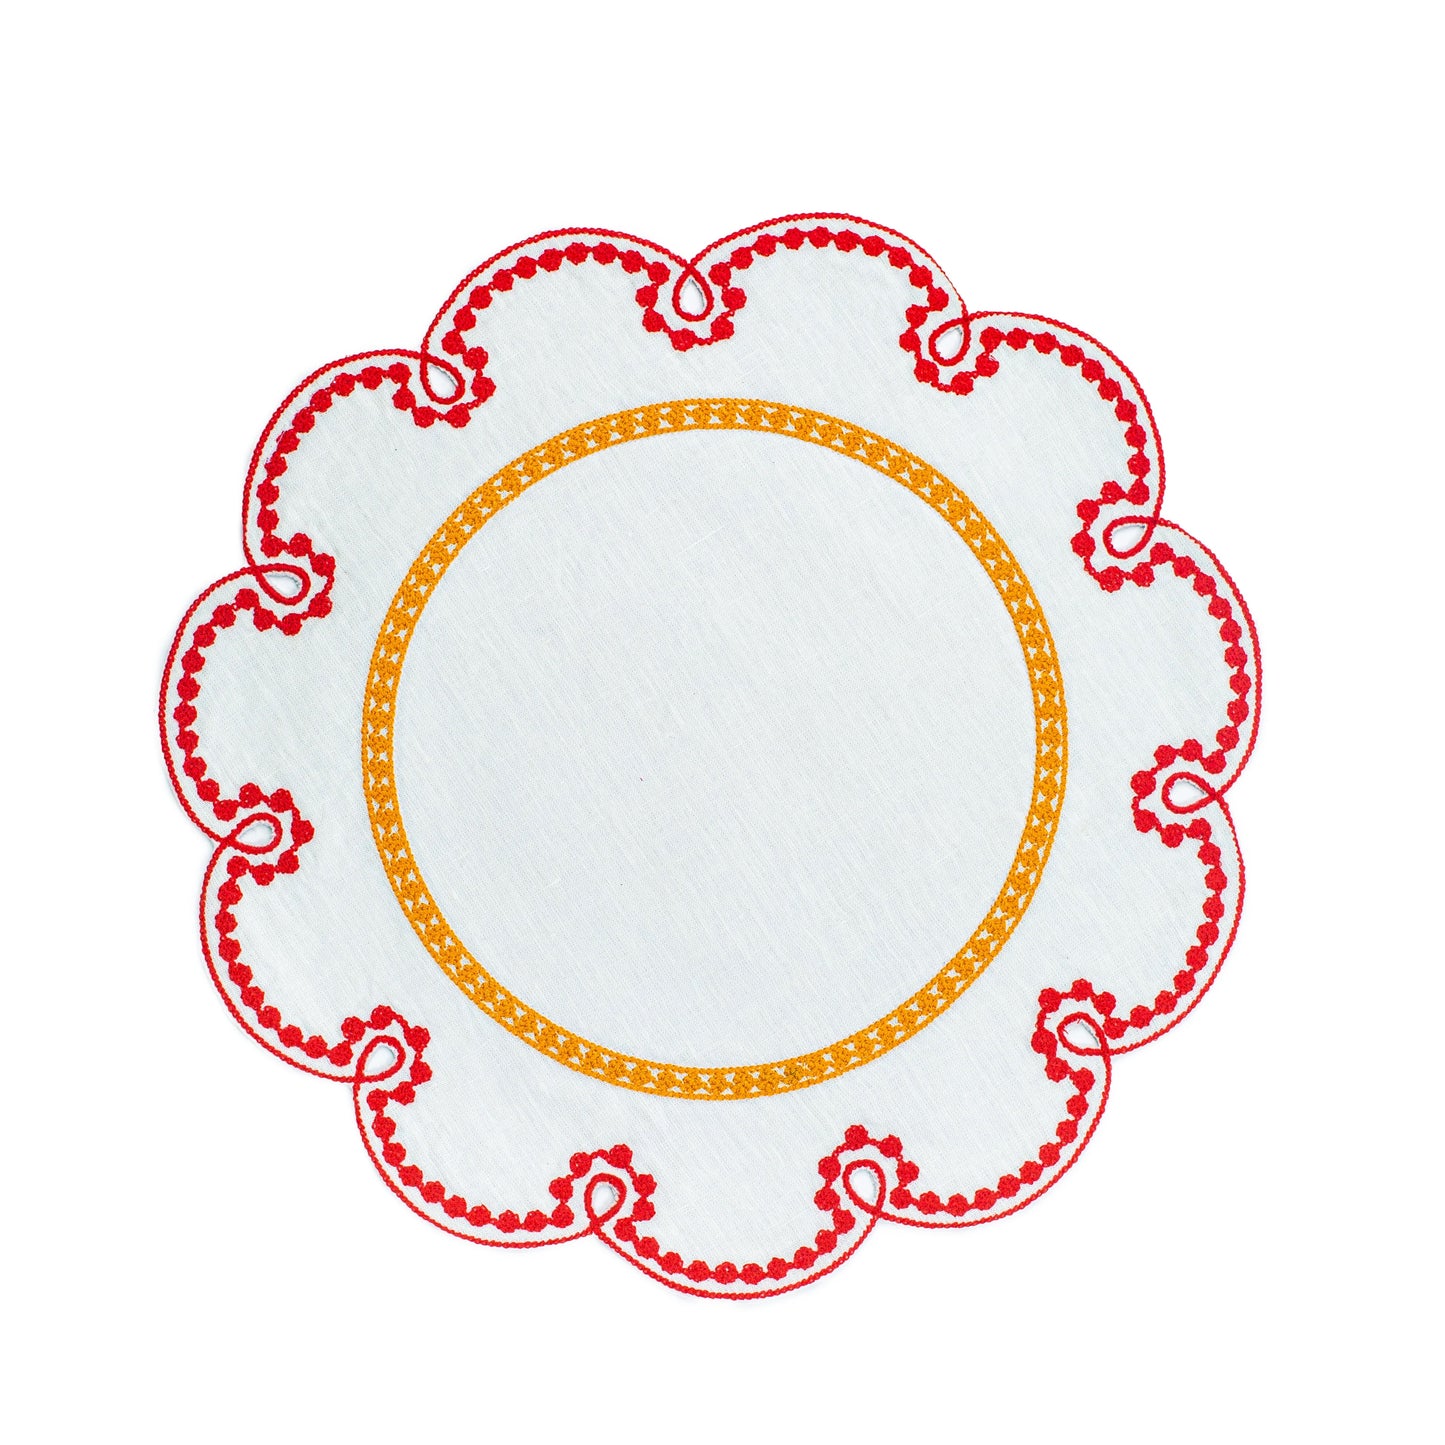 Fete Embroidered Linen Placemats in Red/Amber (Set of 4)